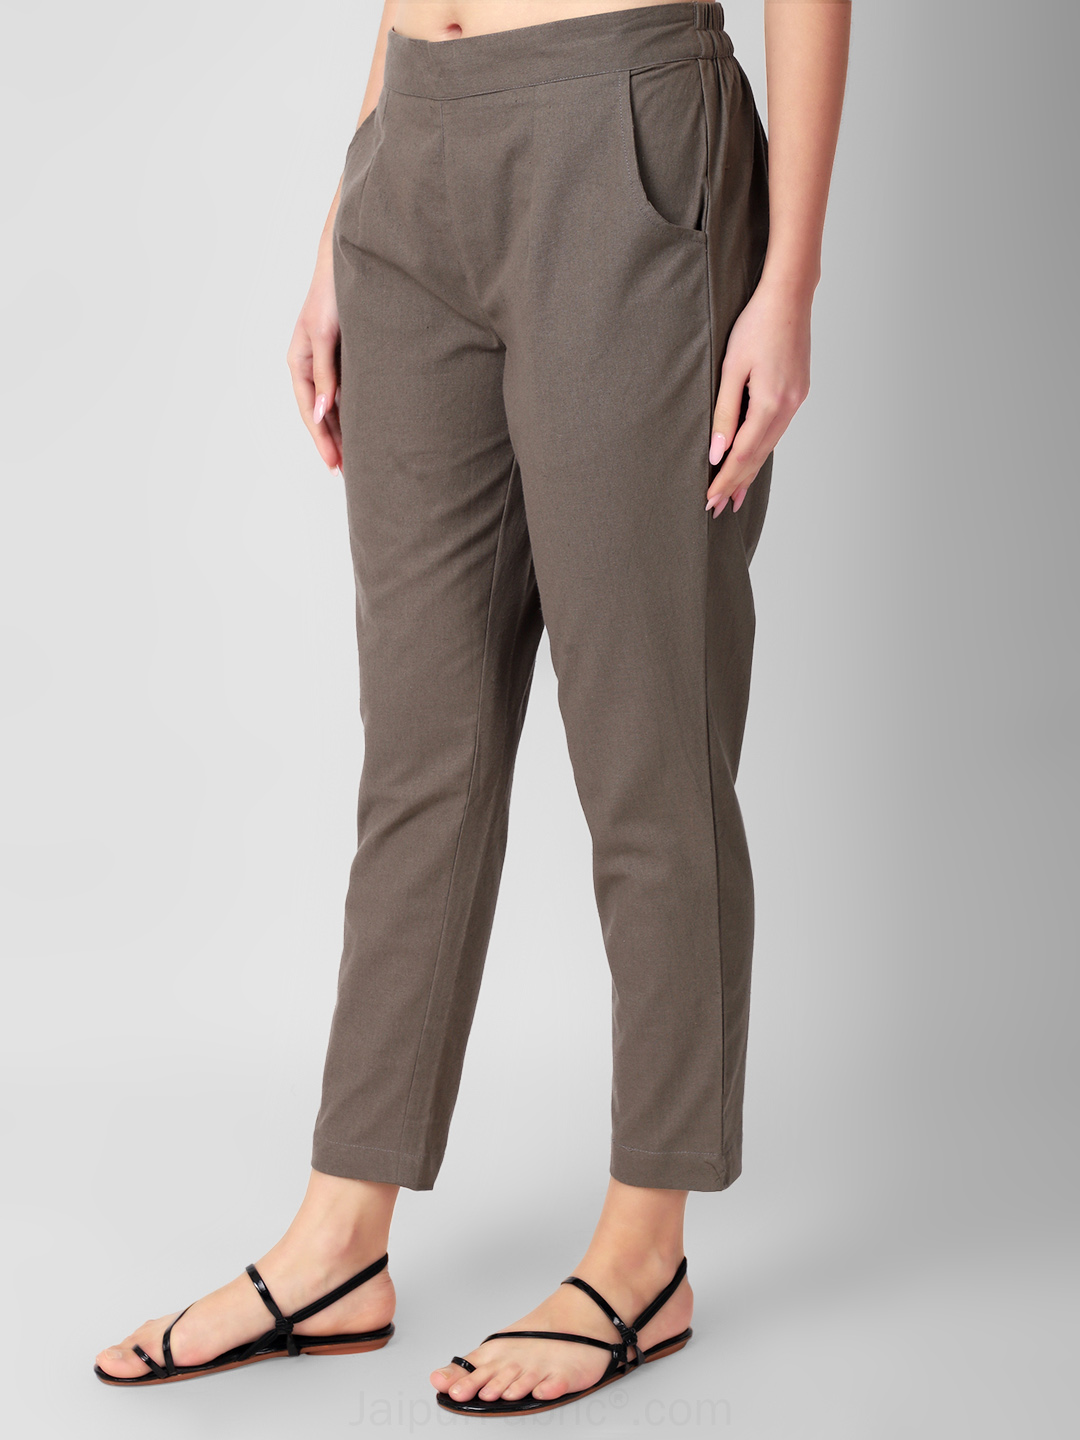 Taupe Neutral Women Cotton Pants casual and semi formal daily trousers